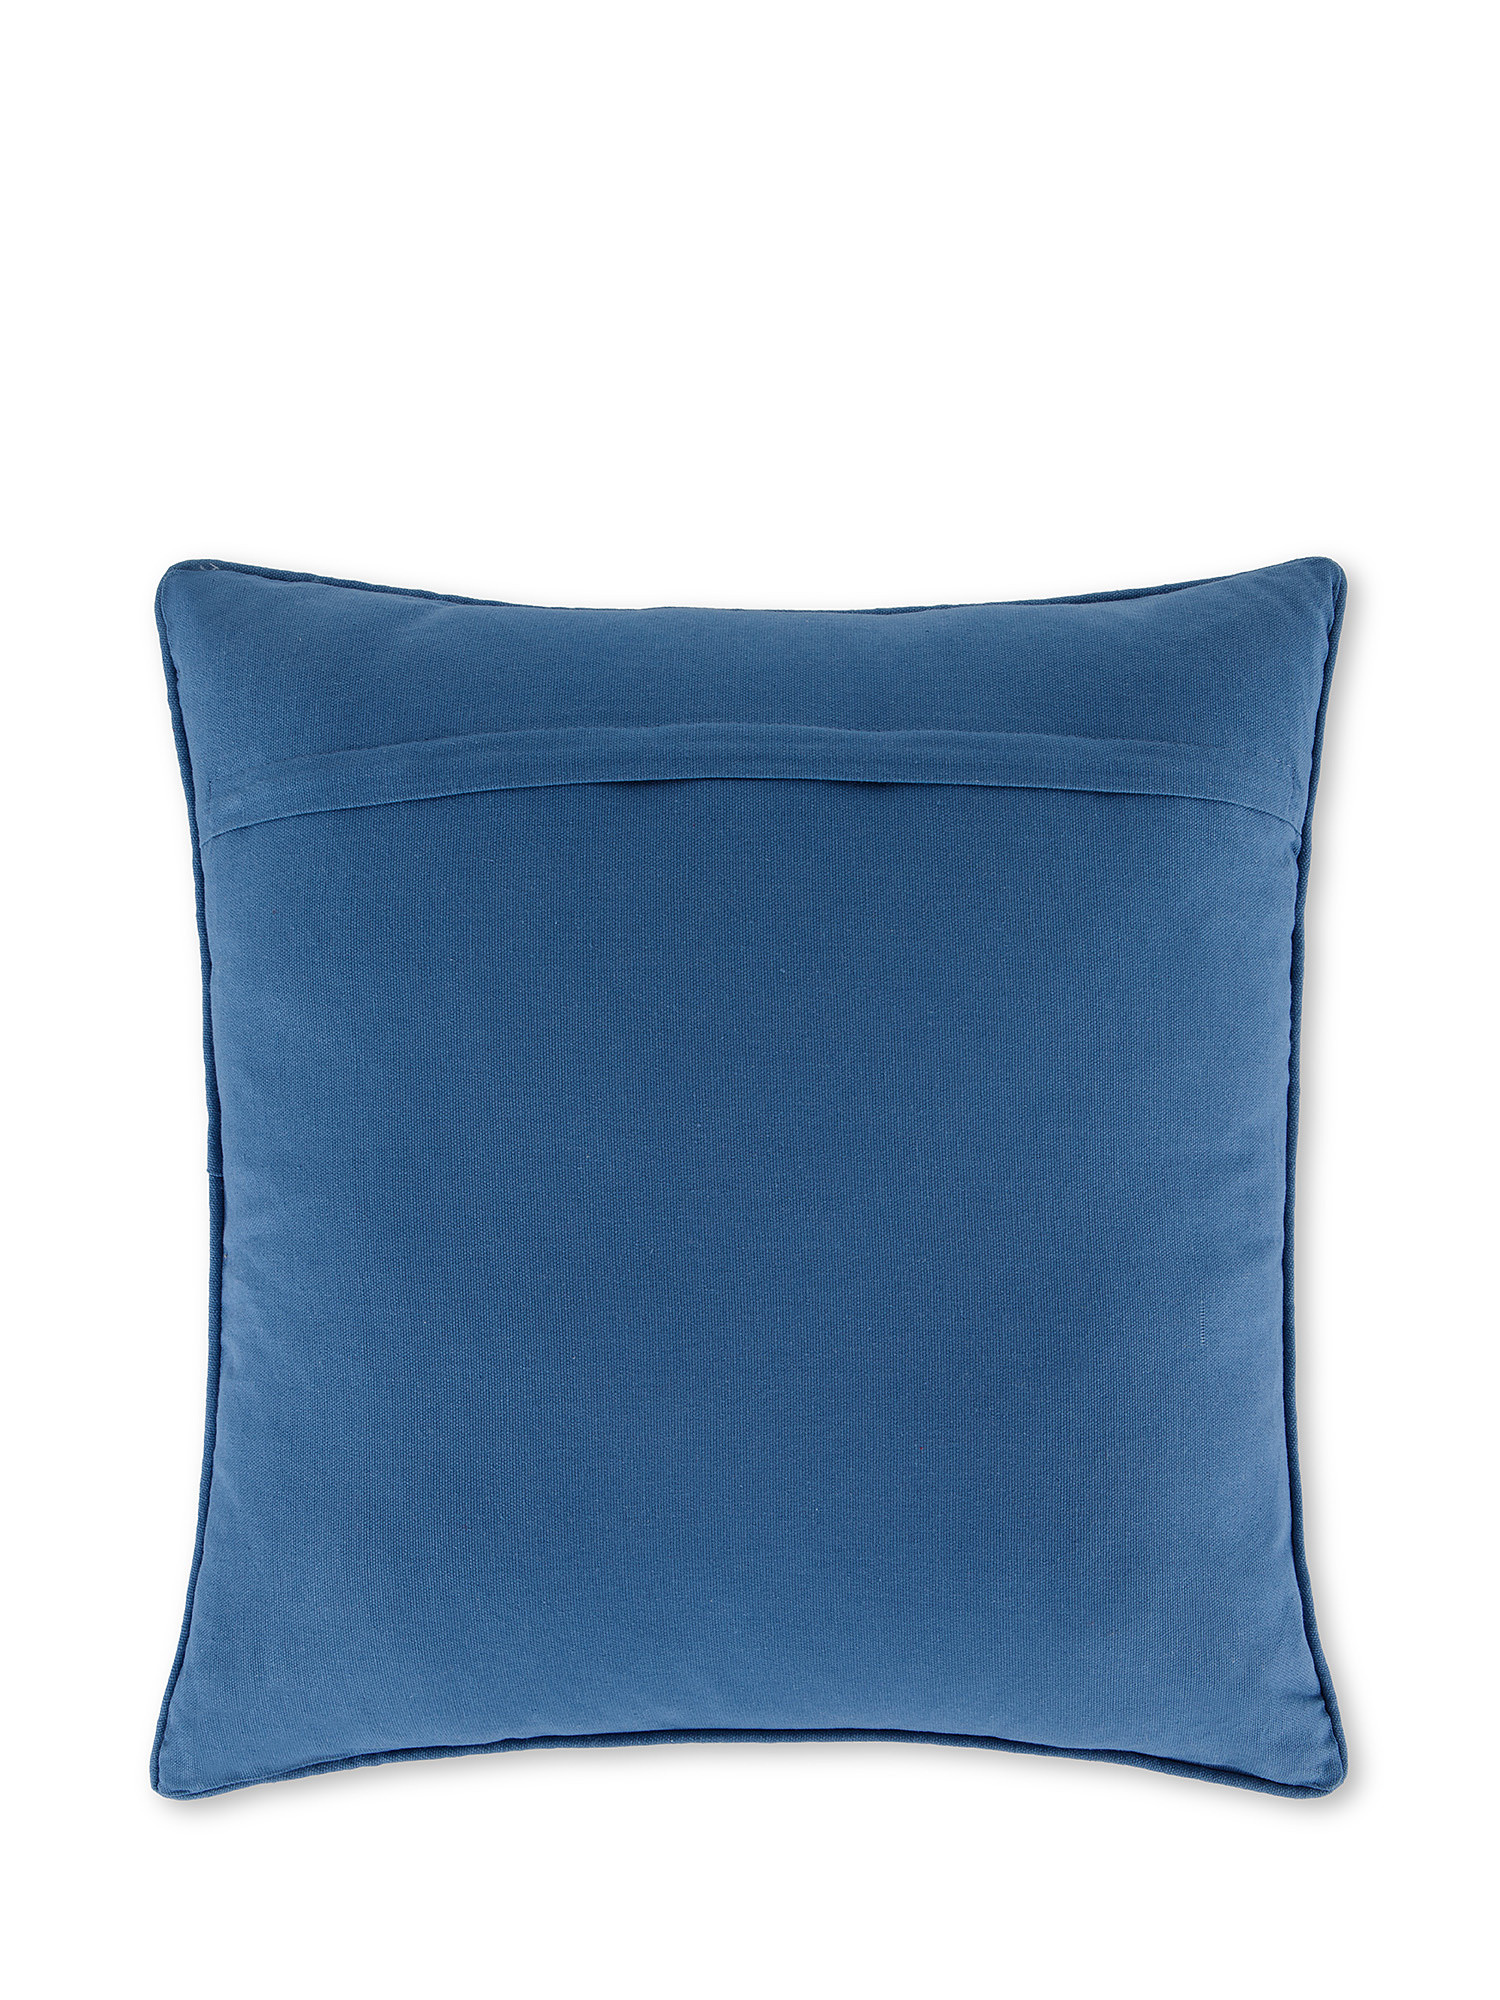 Coral embroidery cushion 45x45cm, Light Blue, large image number 1